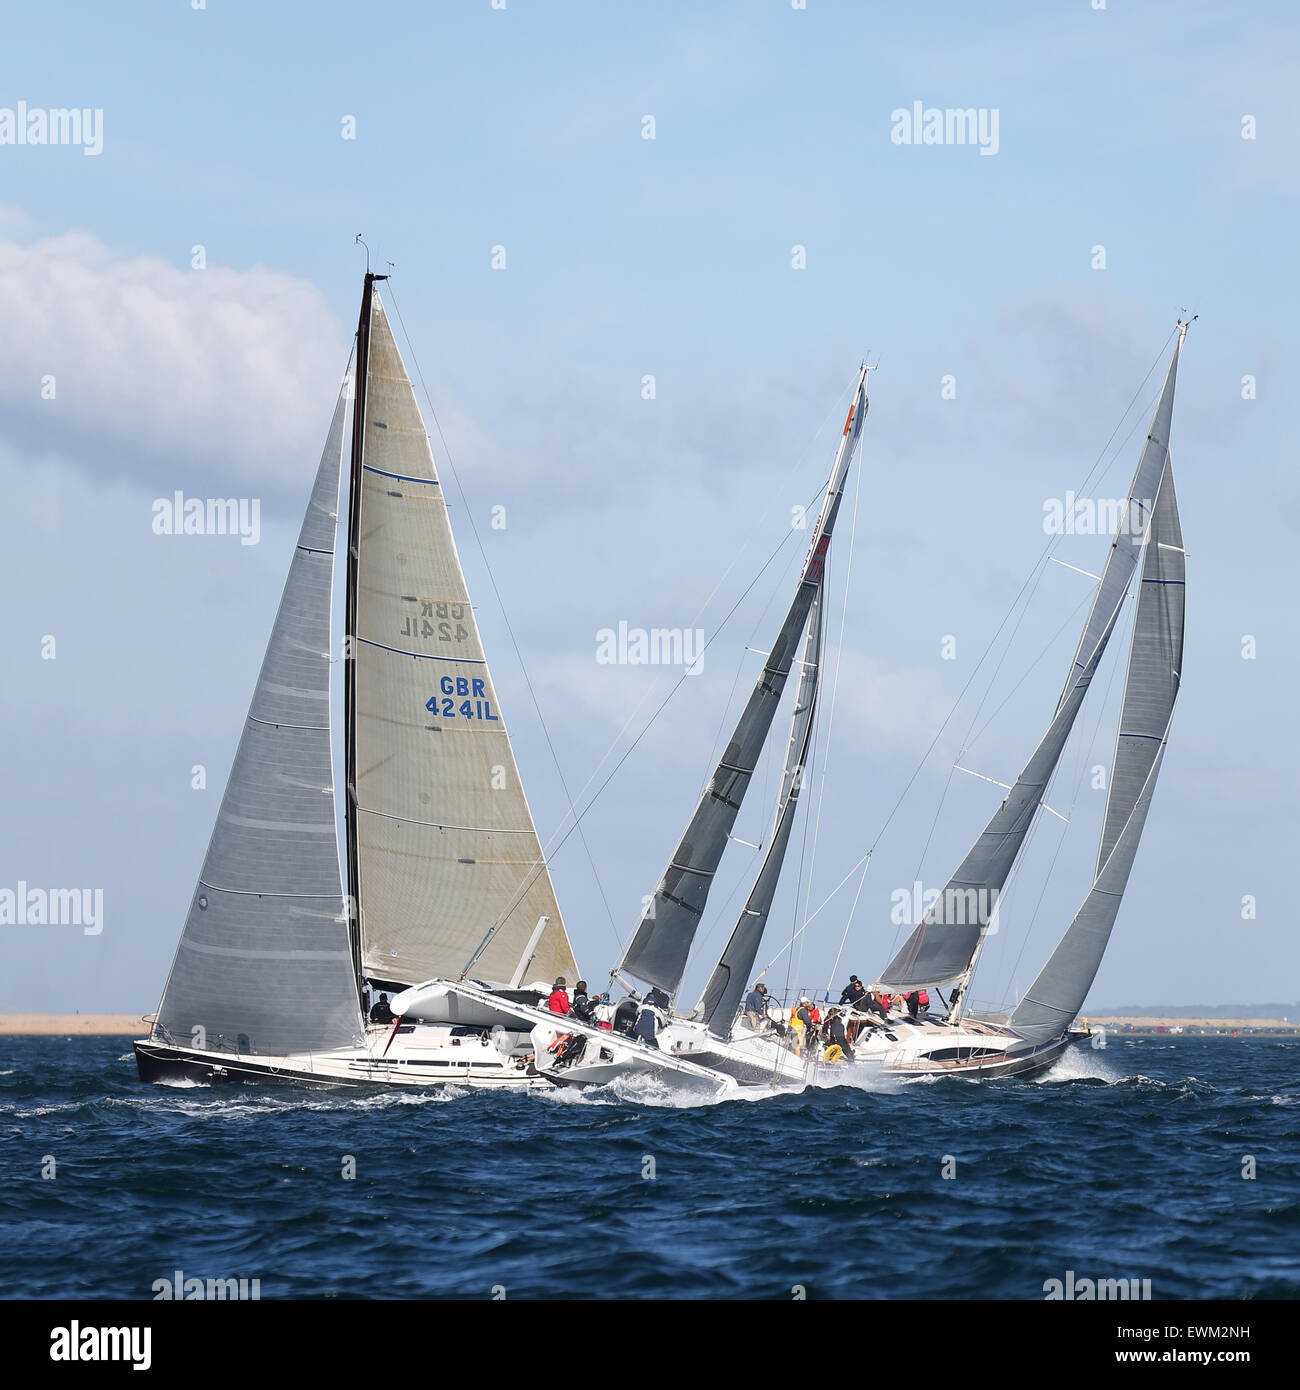 UK. 27th June, 2015. A close encounter between a multihull and two other yachts during the 2015 Round the Island Race Credit:  Niall Ferguson/Alamy Live News Stock Photo